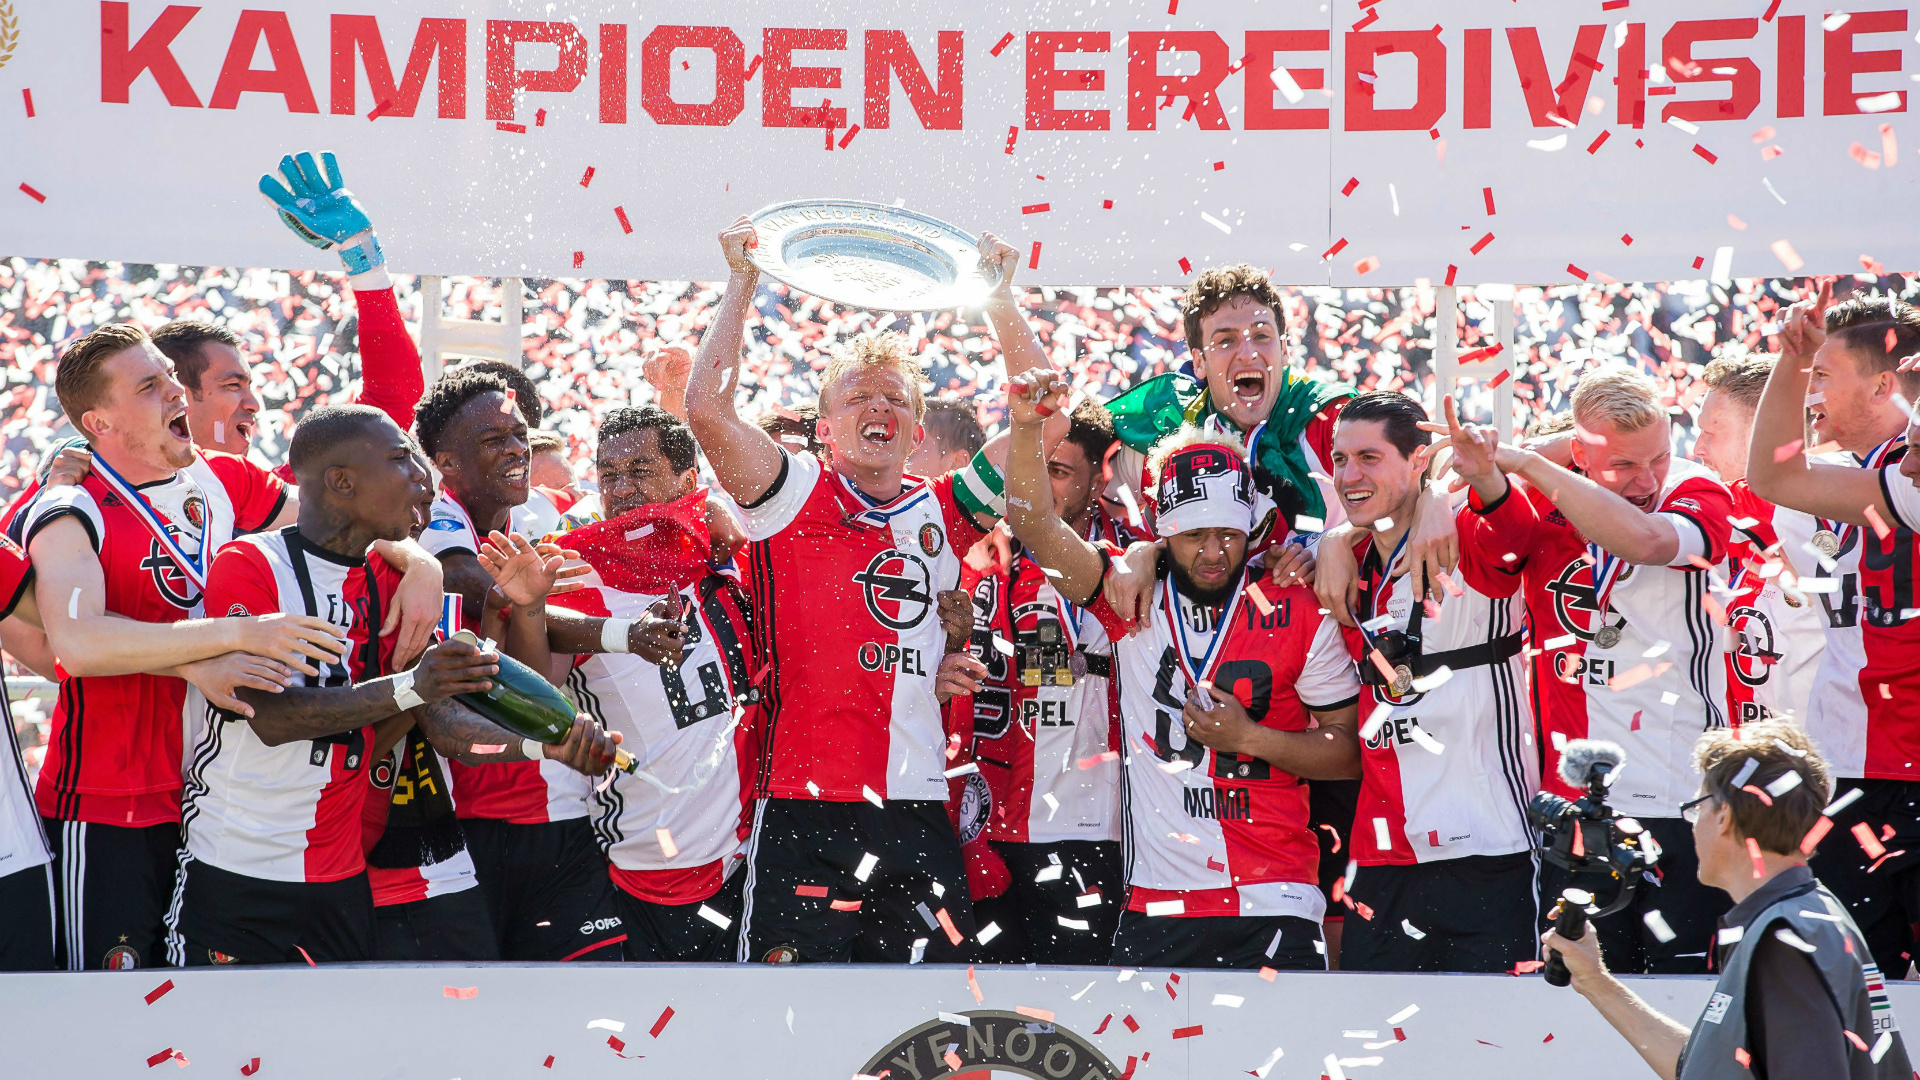 Feyenoord's Eredivisie title win is football's most story | Goal.com